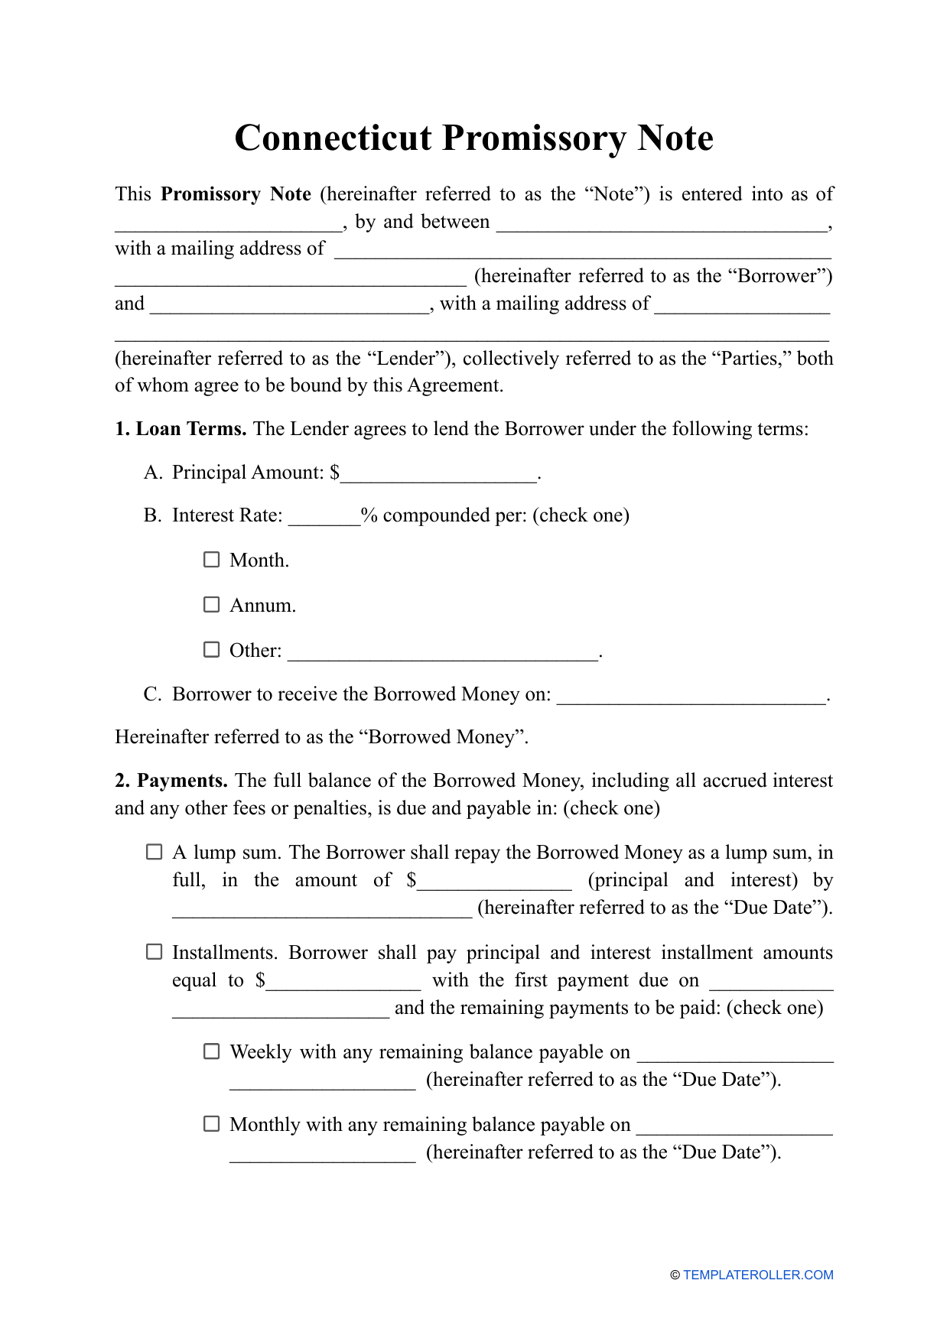 Connecticut Promissory Note Template Fill Out Sign Online and